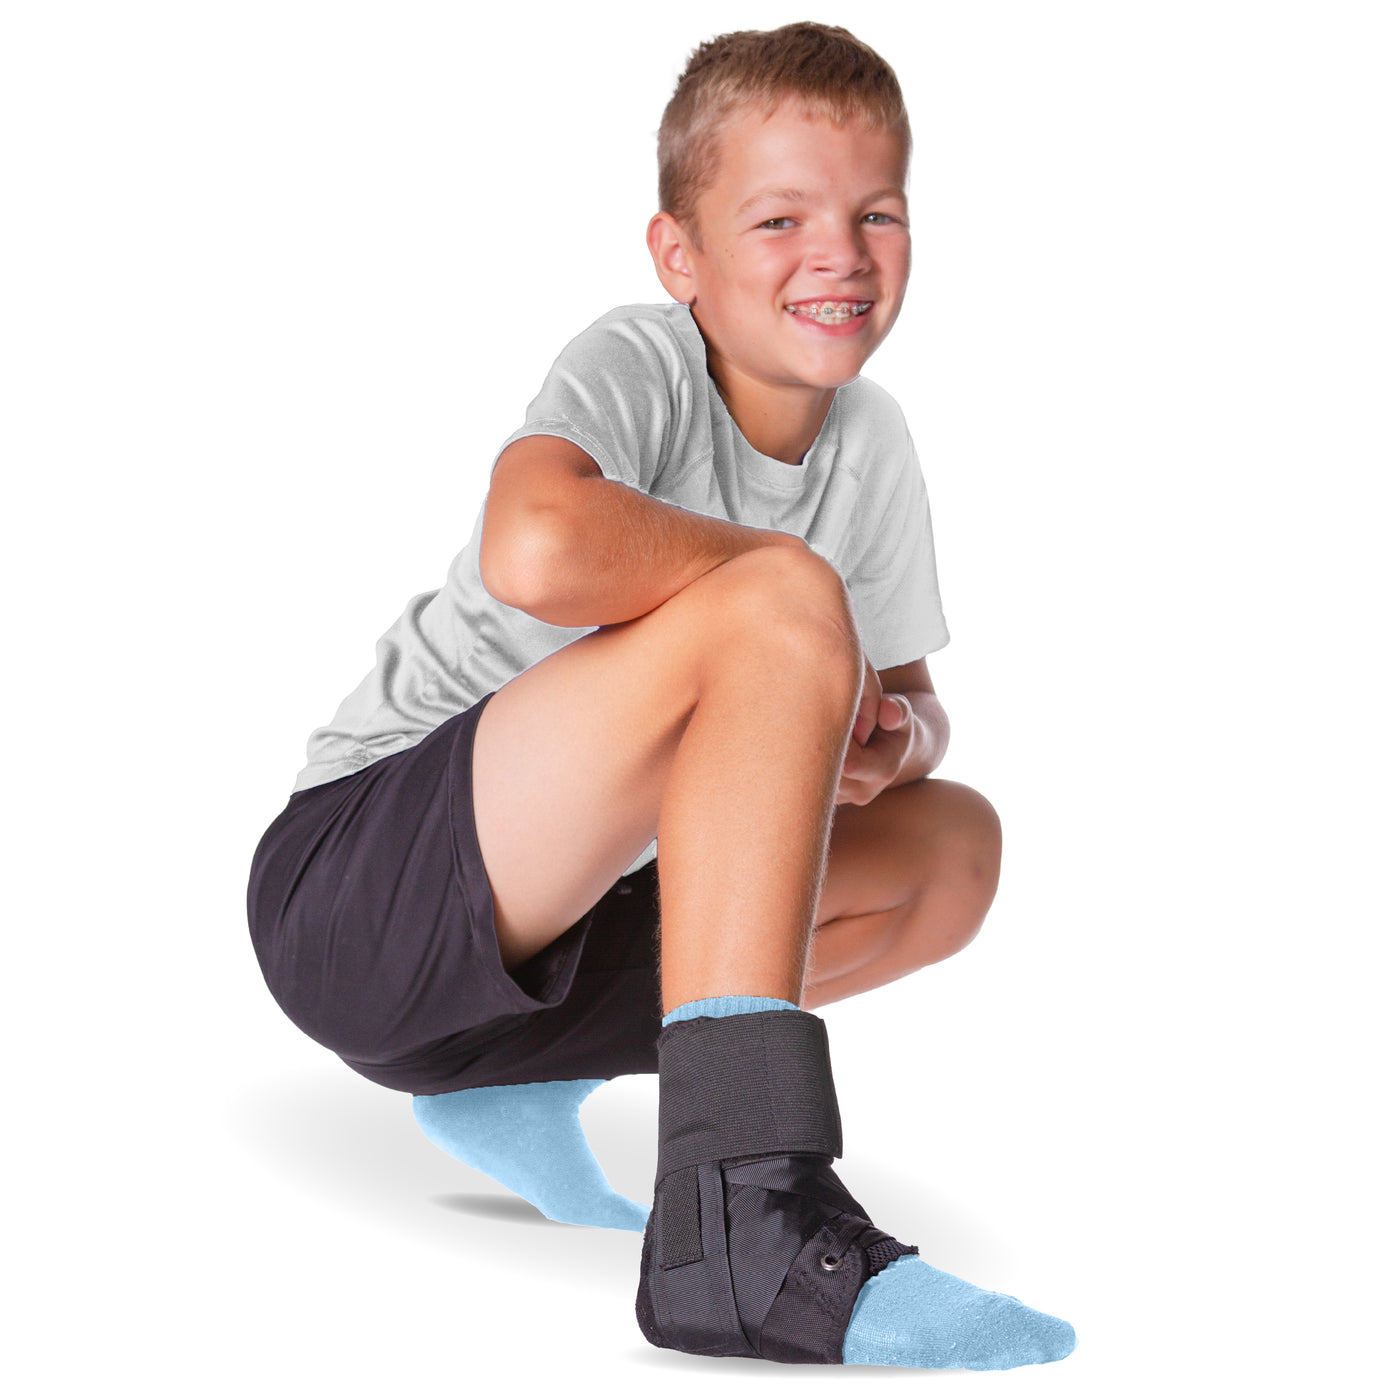 The BraceAbility lace up kids ankle brace comes in a black color with figure 8 straps